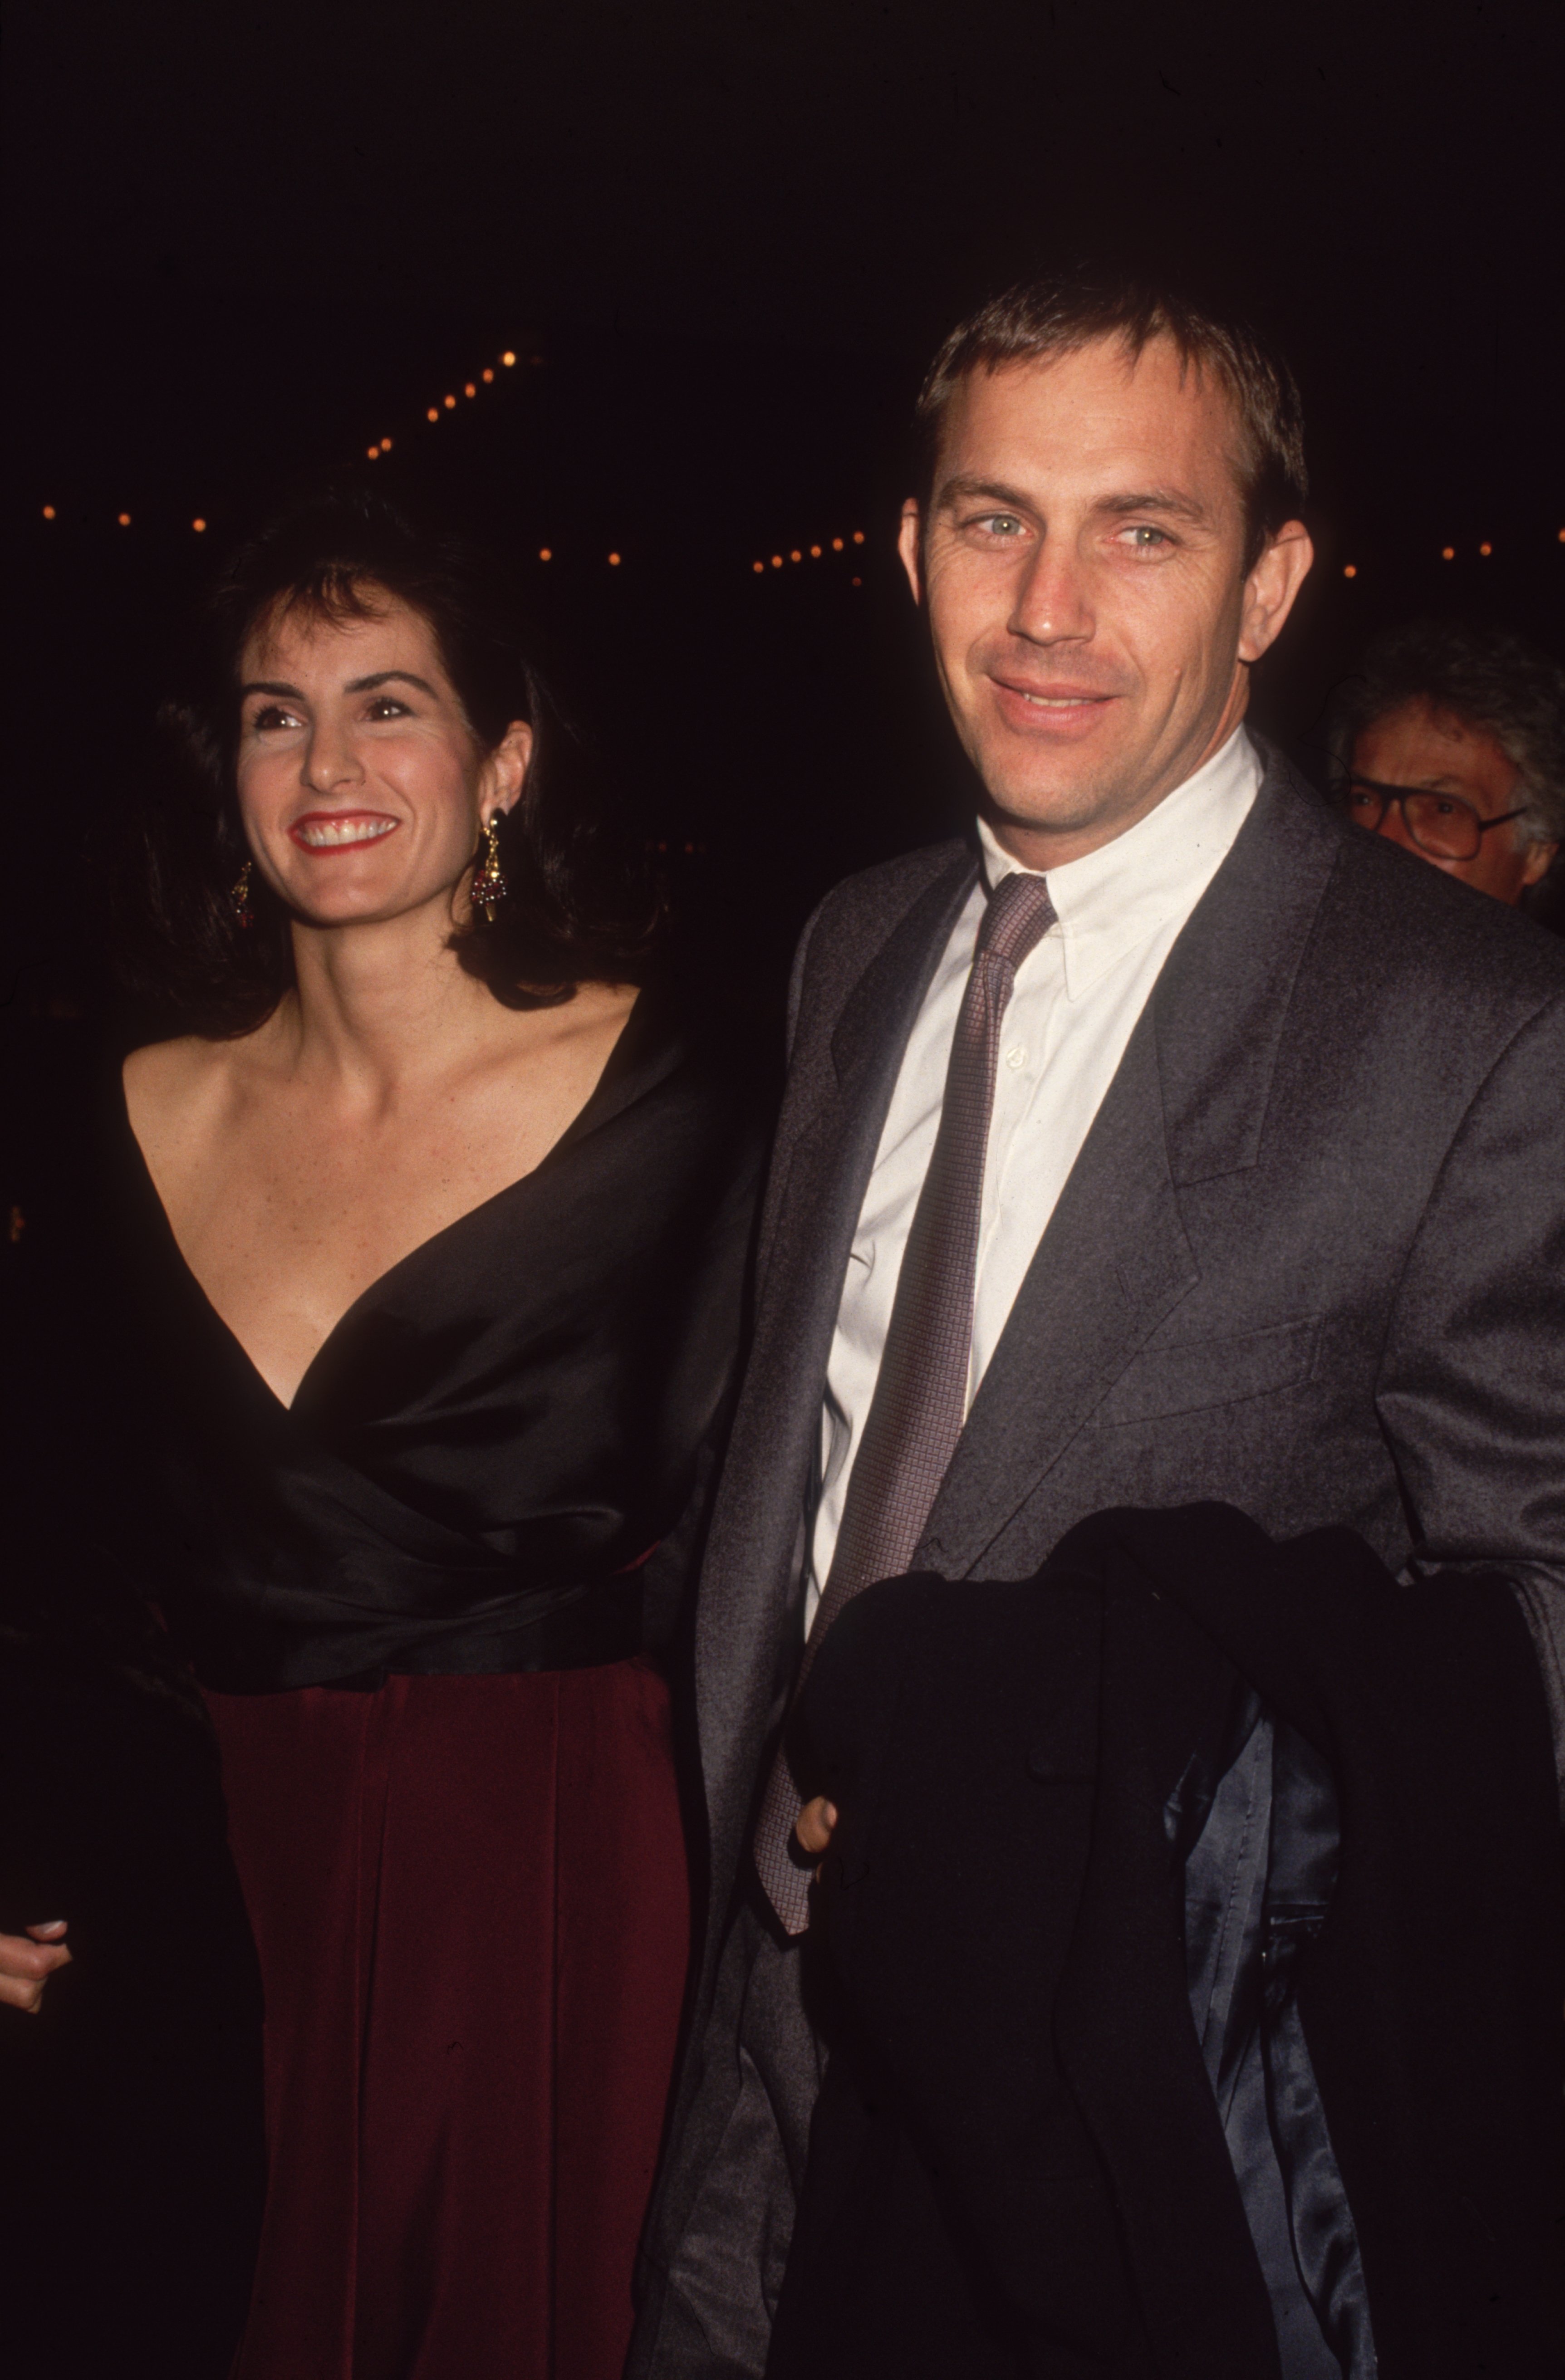  American actor Kevin Costner and his wife, Cindy Silva, smile while arriving at a semiformal event. | Source: Getty Images